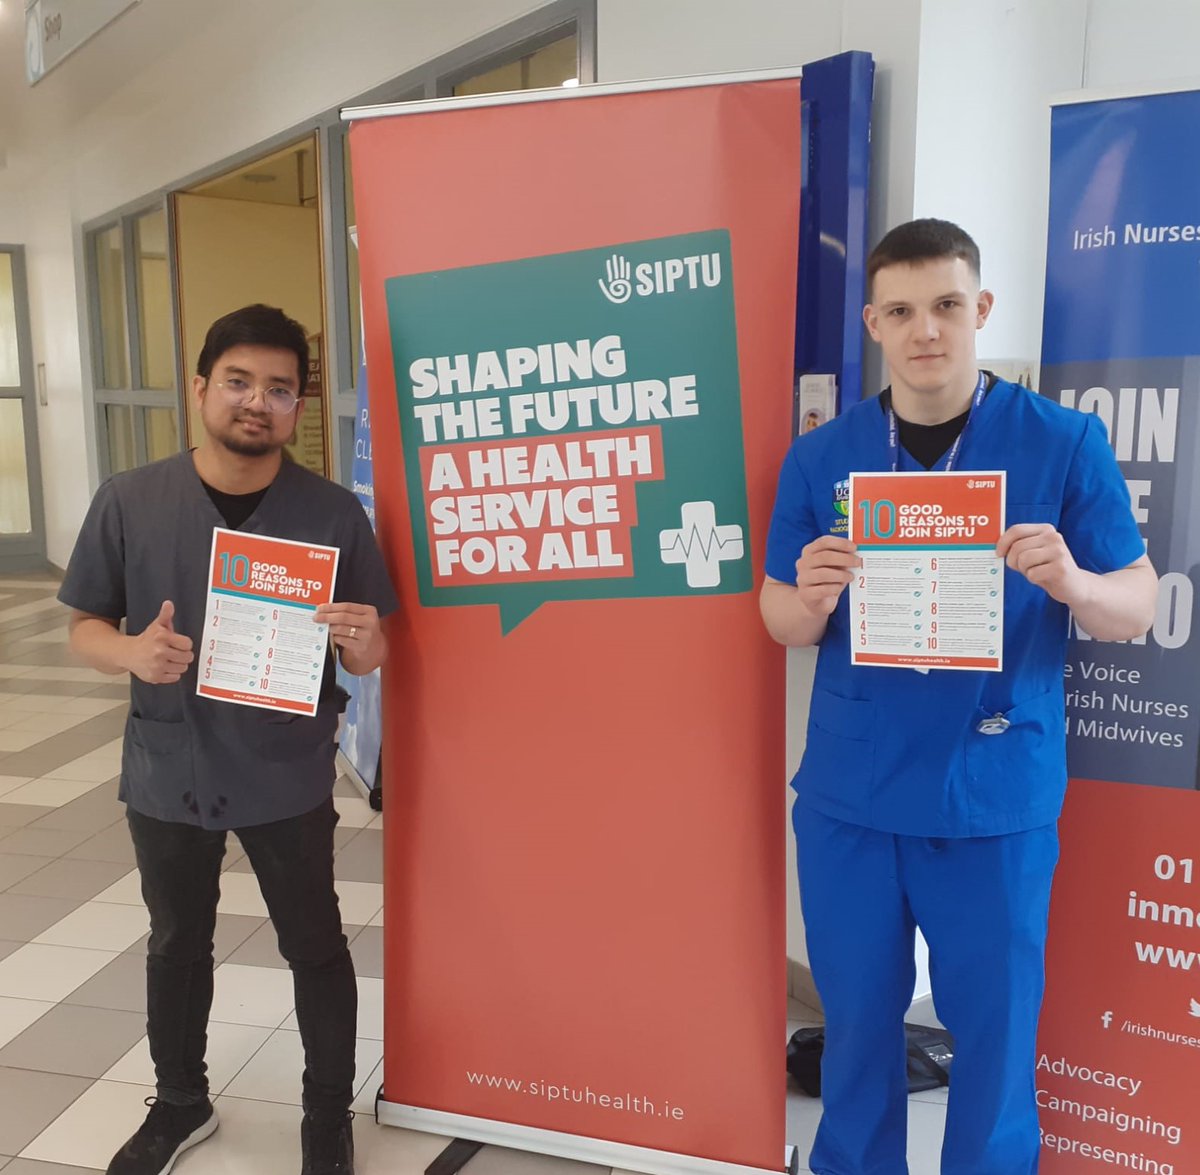 Today is the beginning of #TradeUnionWeek. Our organisers & activists are visiting sites across the country to talk about the values & advantages of being in a trade union. In a union, you can achieve: 💵Better pay 📄Job security 🦺A safer workplace #BetterInATradeUnion